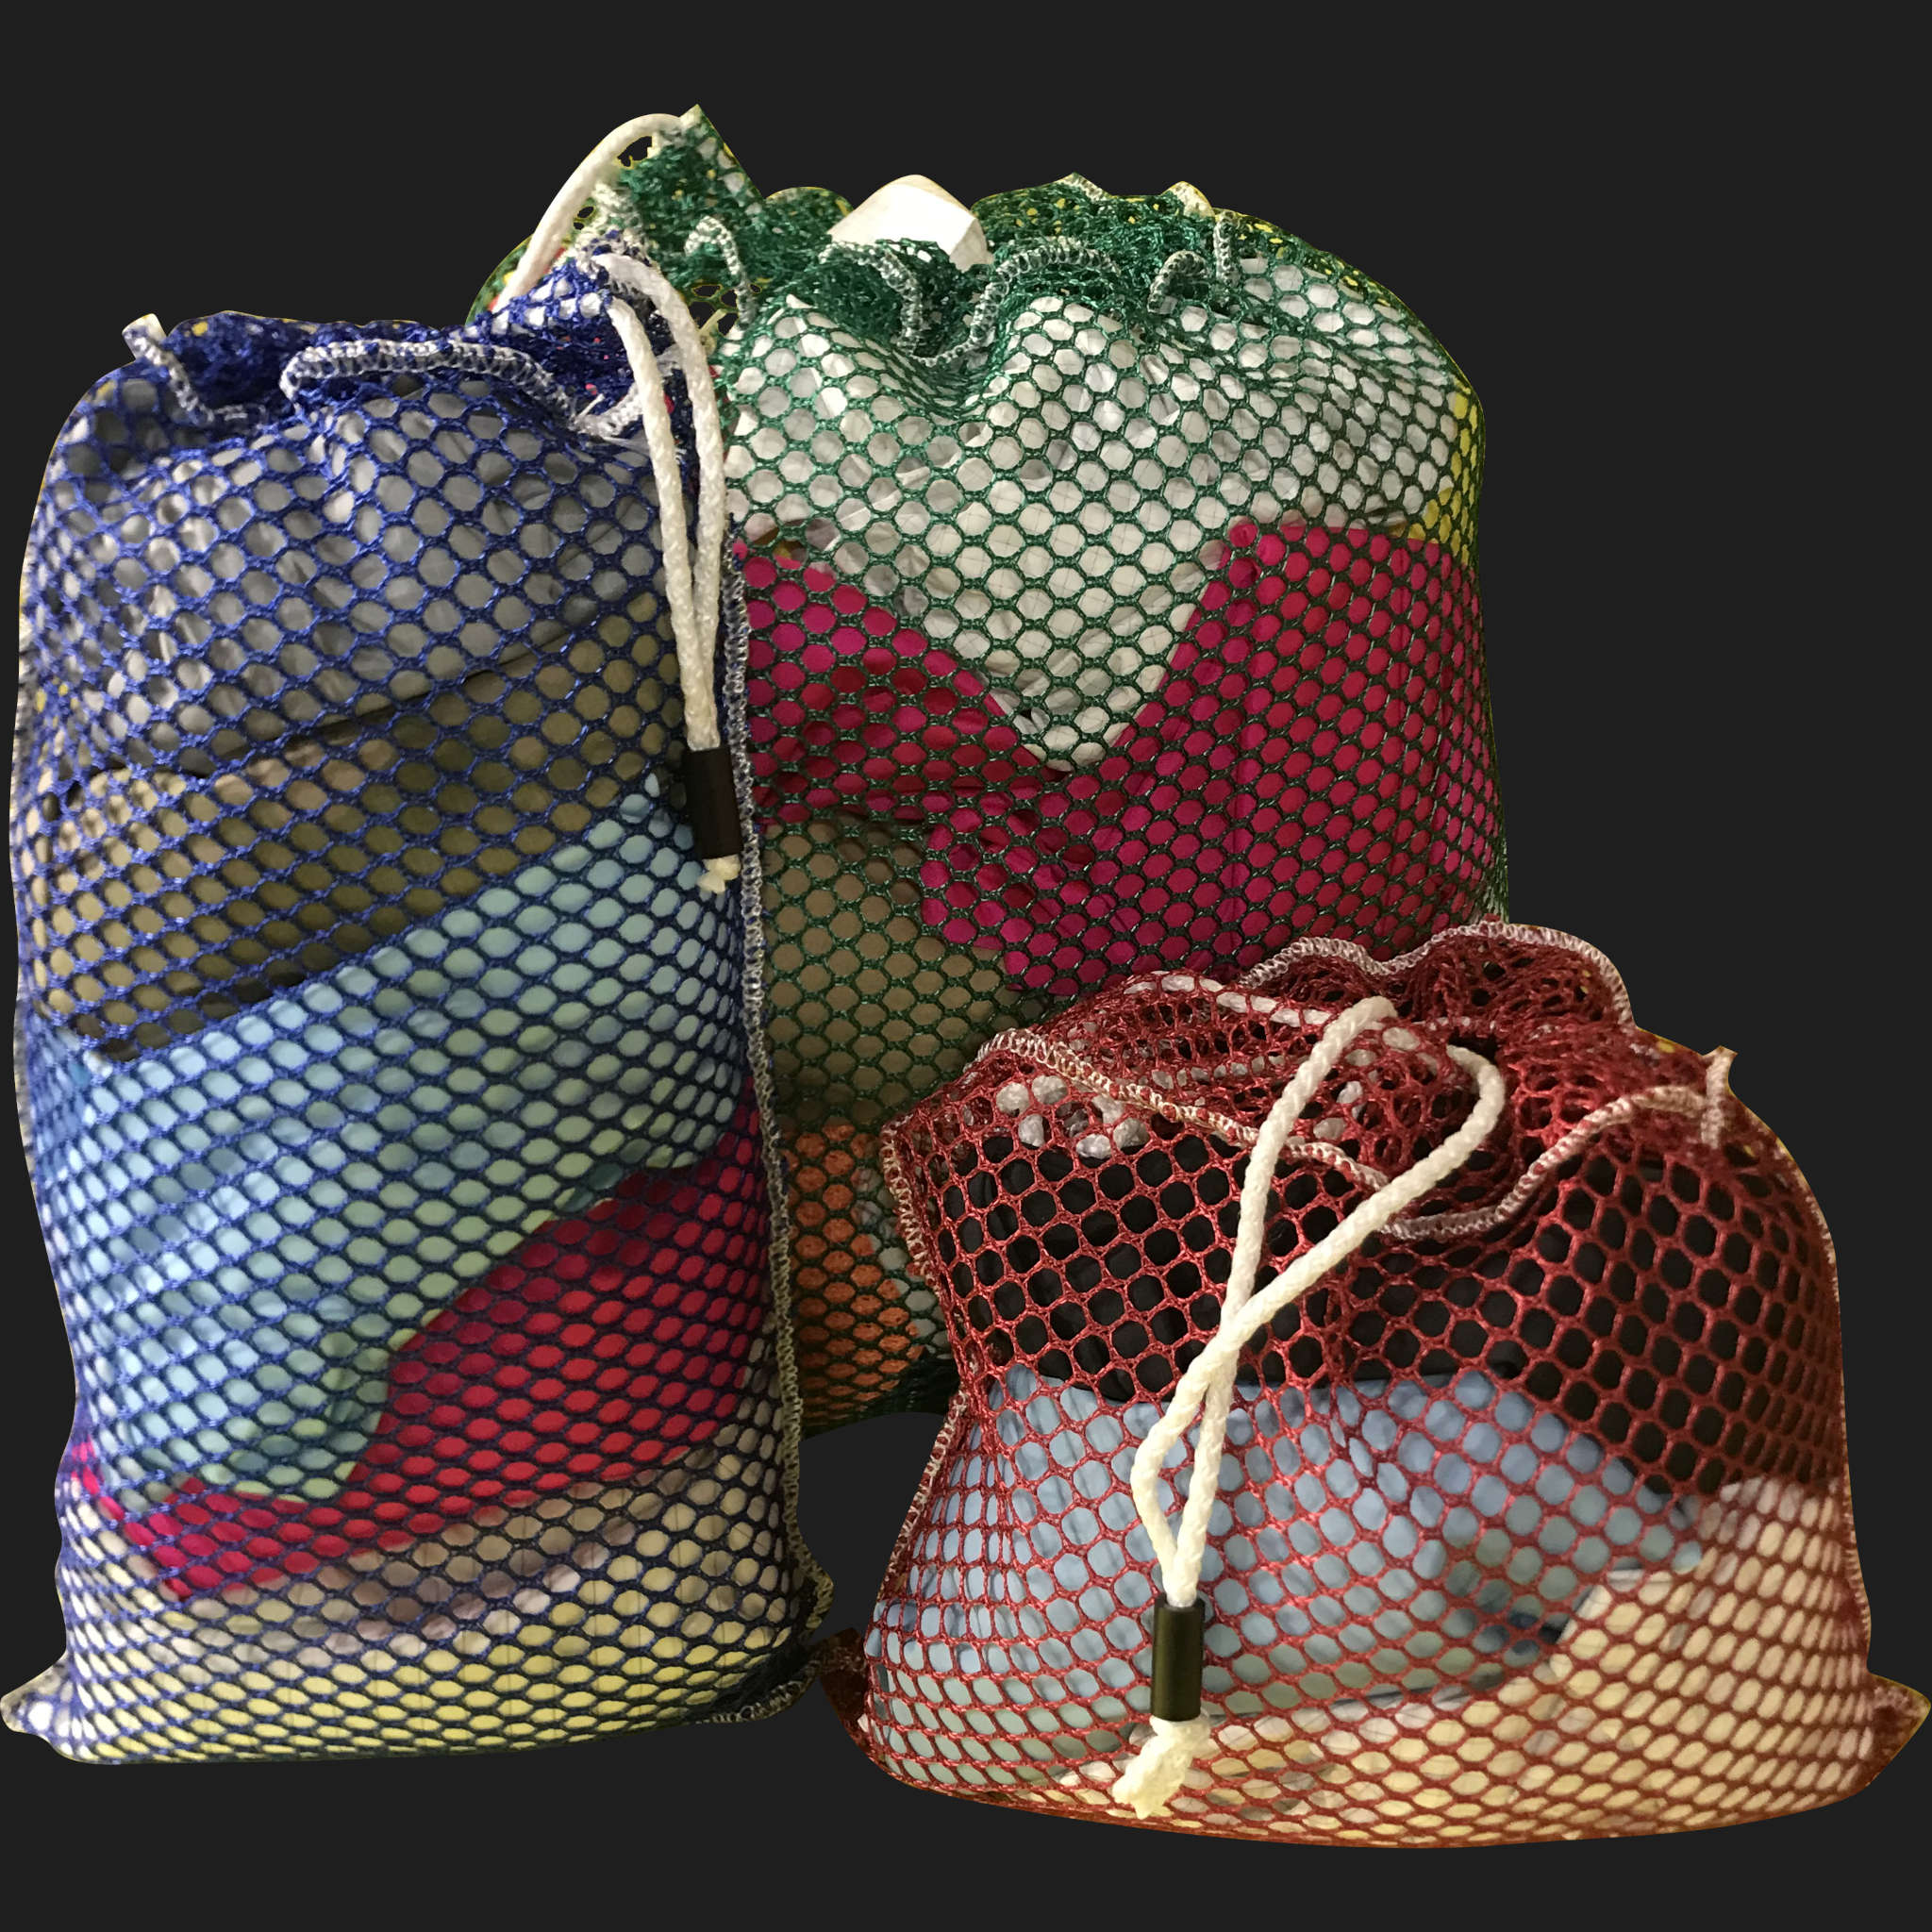 22" x 40" Customized Mesh-Net-Laundry Bags Heavy Duty with Cord and barrellock closure